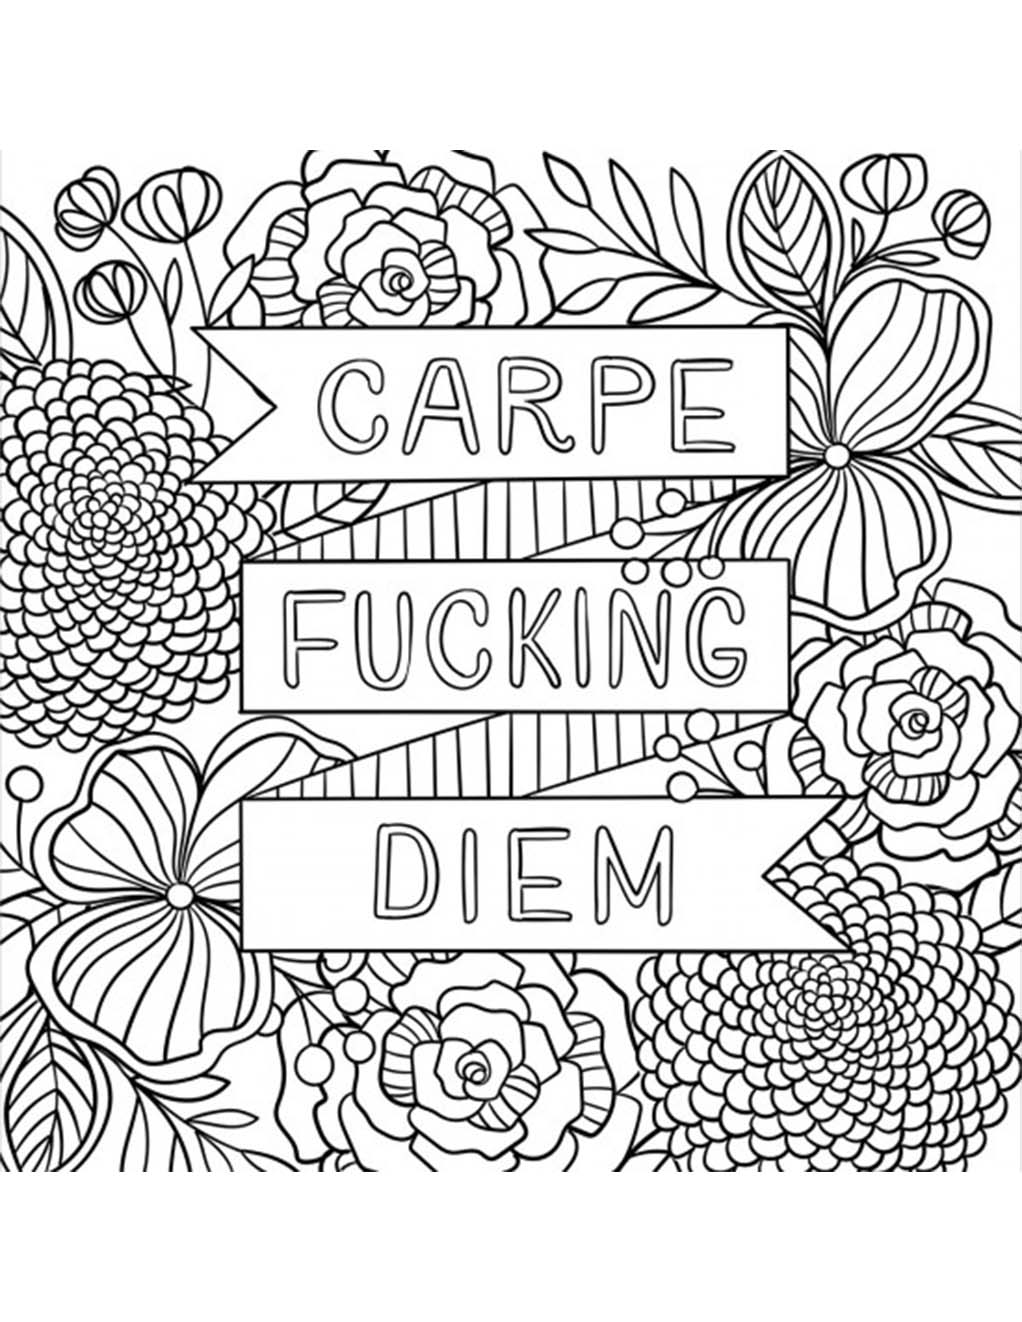 Inner F*cking Peace Coloring Book- Page